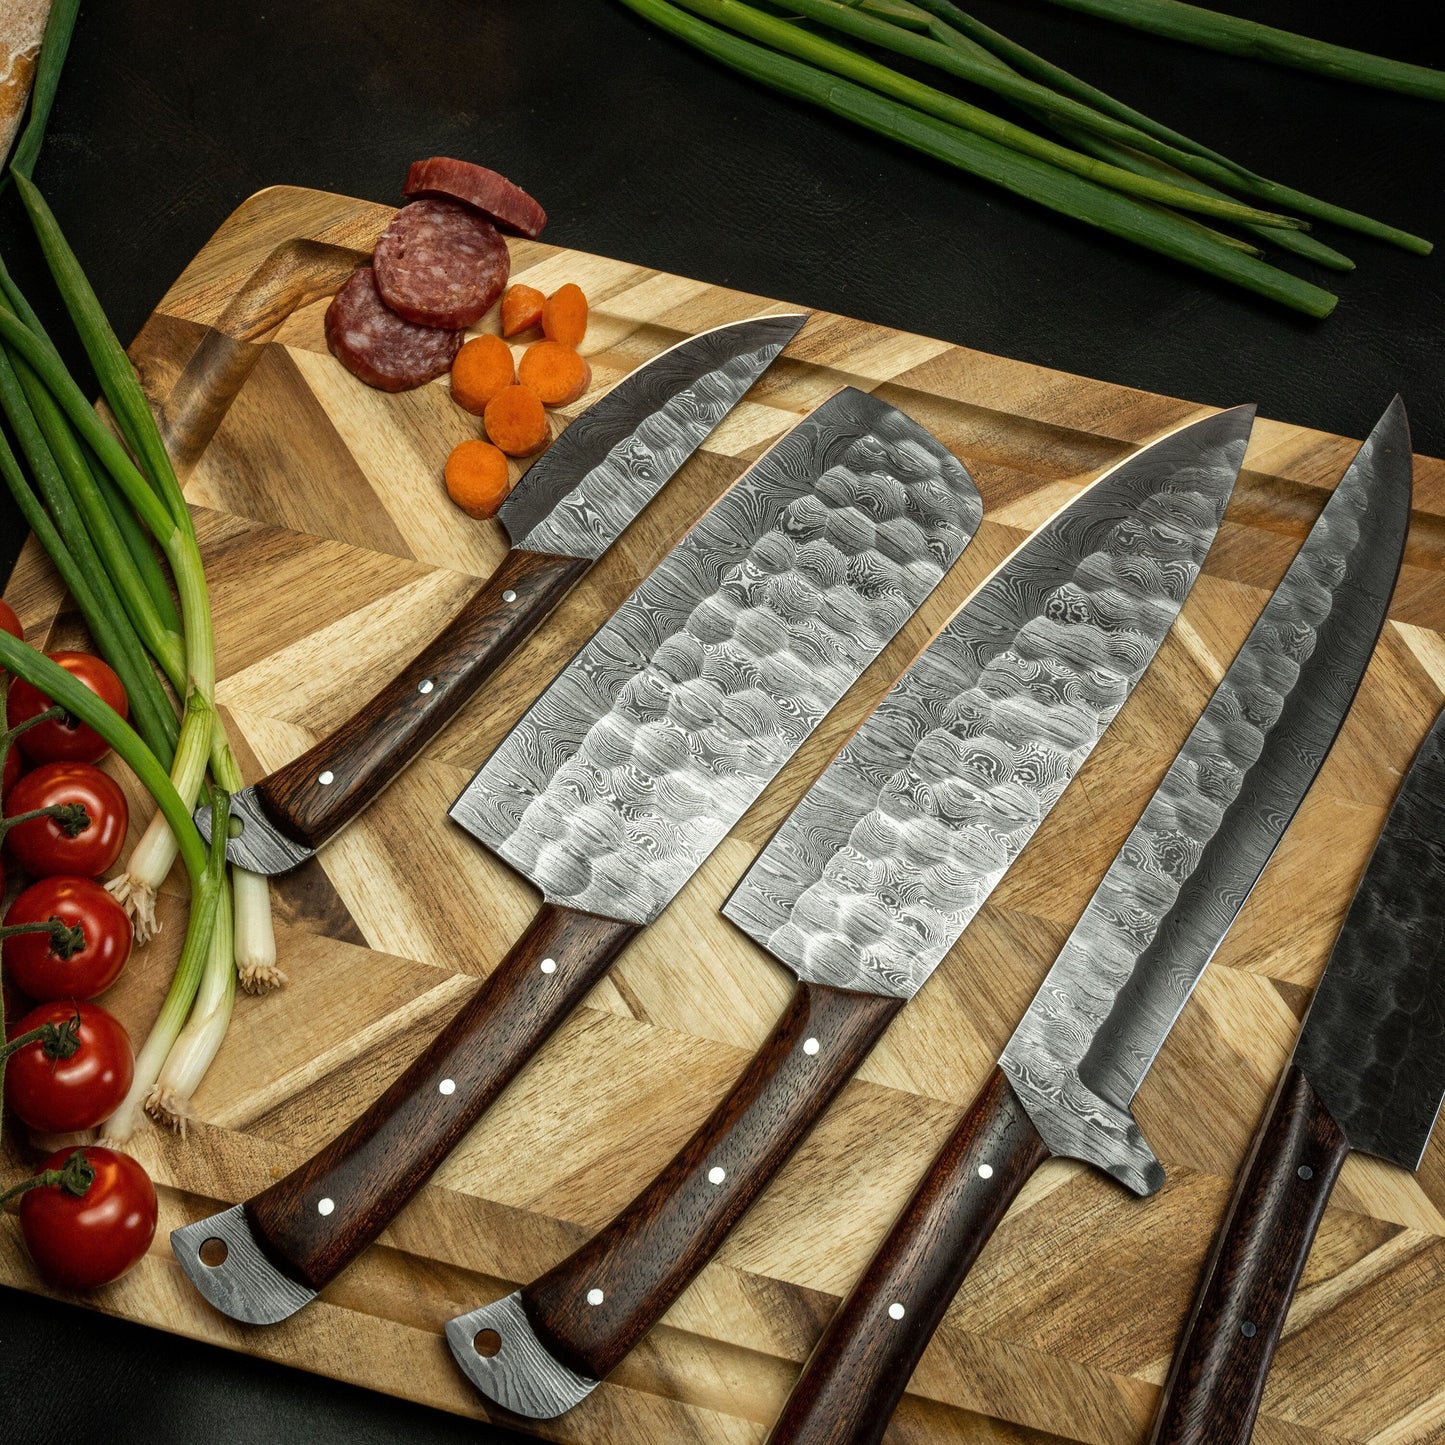 5 pcs Damascus Kitchen Knives Indoor-Outdoor BBQ Cooking Chef Set Knife Full Tang Wood Handle Cleaver Fillet Paring Knife Free Leather Roll - Premium best Happy Valentine Day gift from SCORPION KART - Just $200! Shop now at SCORPION KART